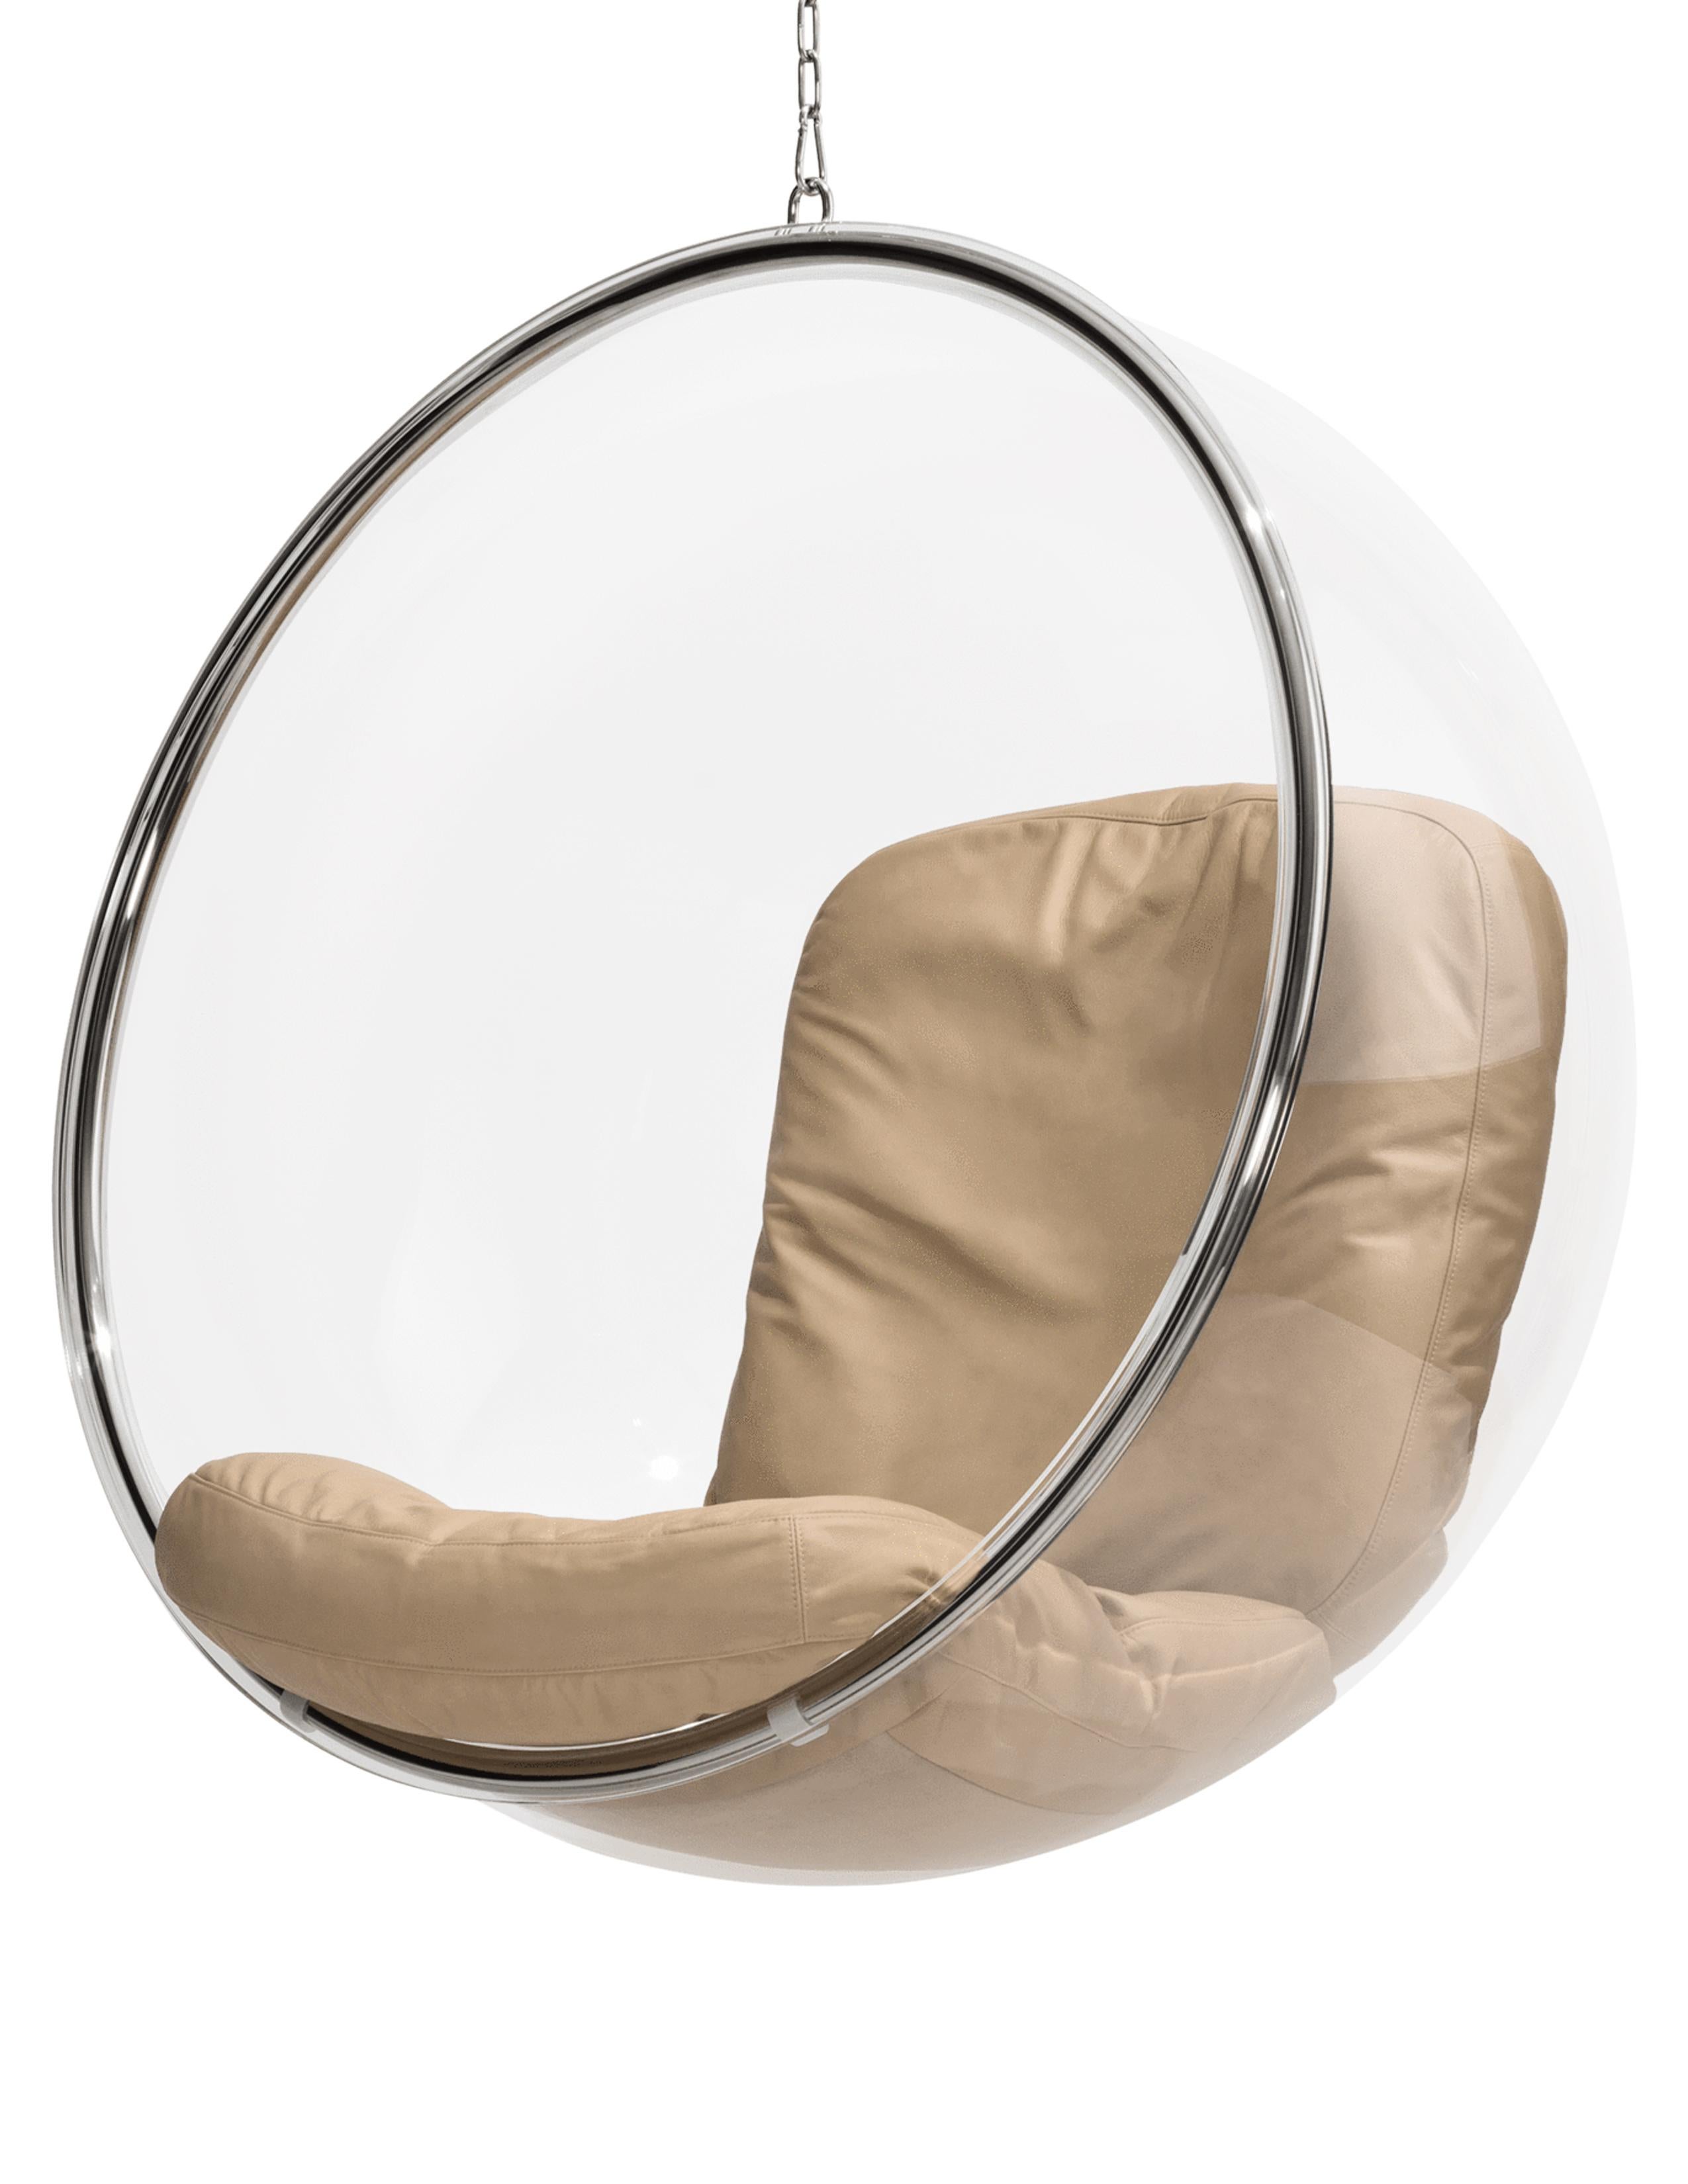 Bubble chair (with white leather cushions)
Designed by Eero Aarnio
Authentic, licensed original.
The Bubble chair was designed by Eero Aarnio in 1968. According to Eero’s notes, the Bubble hangs from the ceiling because ‘there is no nice way to